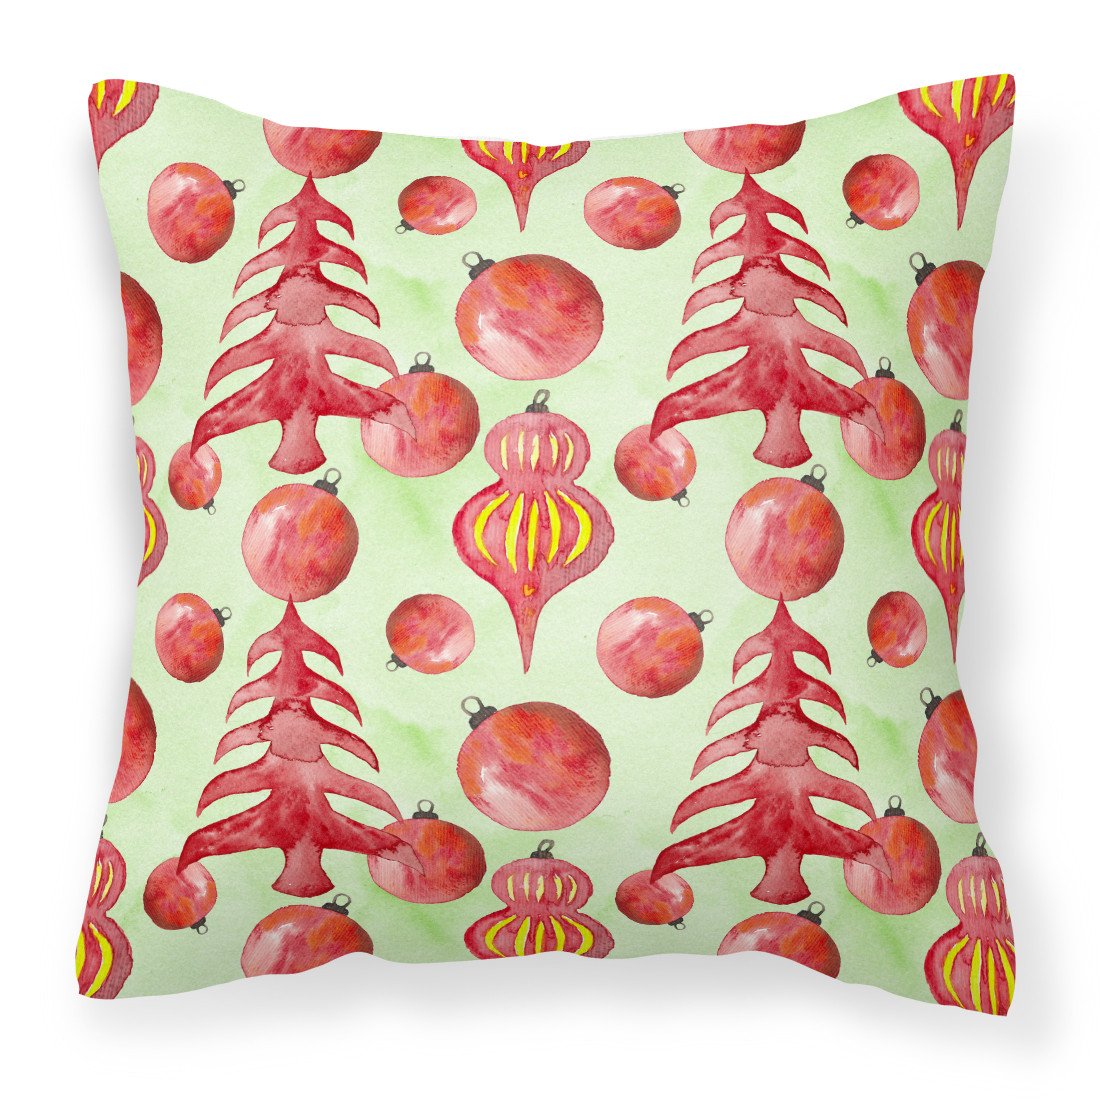 Red Christmas Tree and Ornaments Fabric Decorative Pillow BB7483PW1818 by Caroline's Treasures